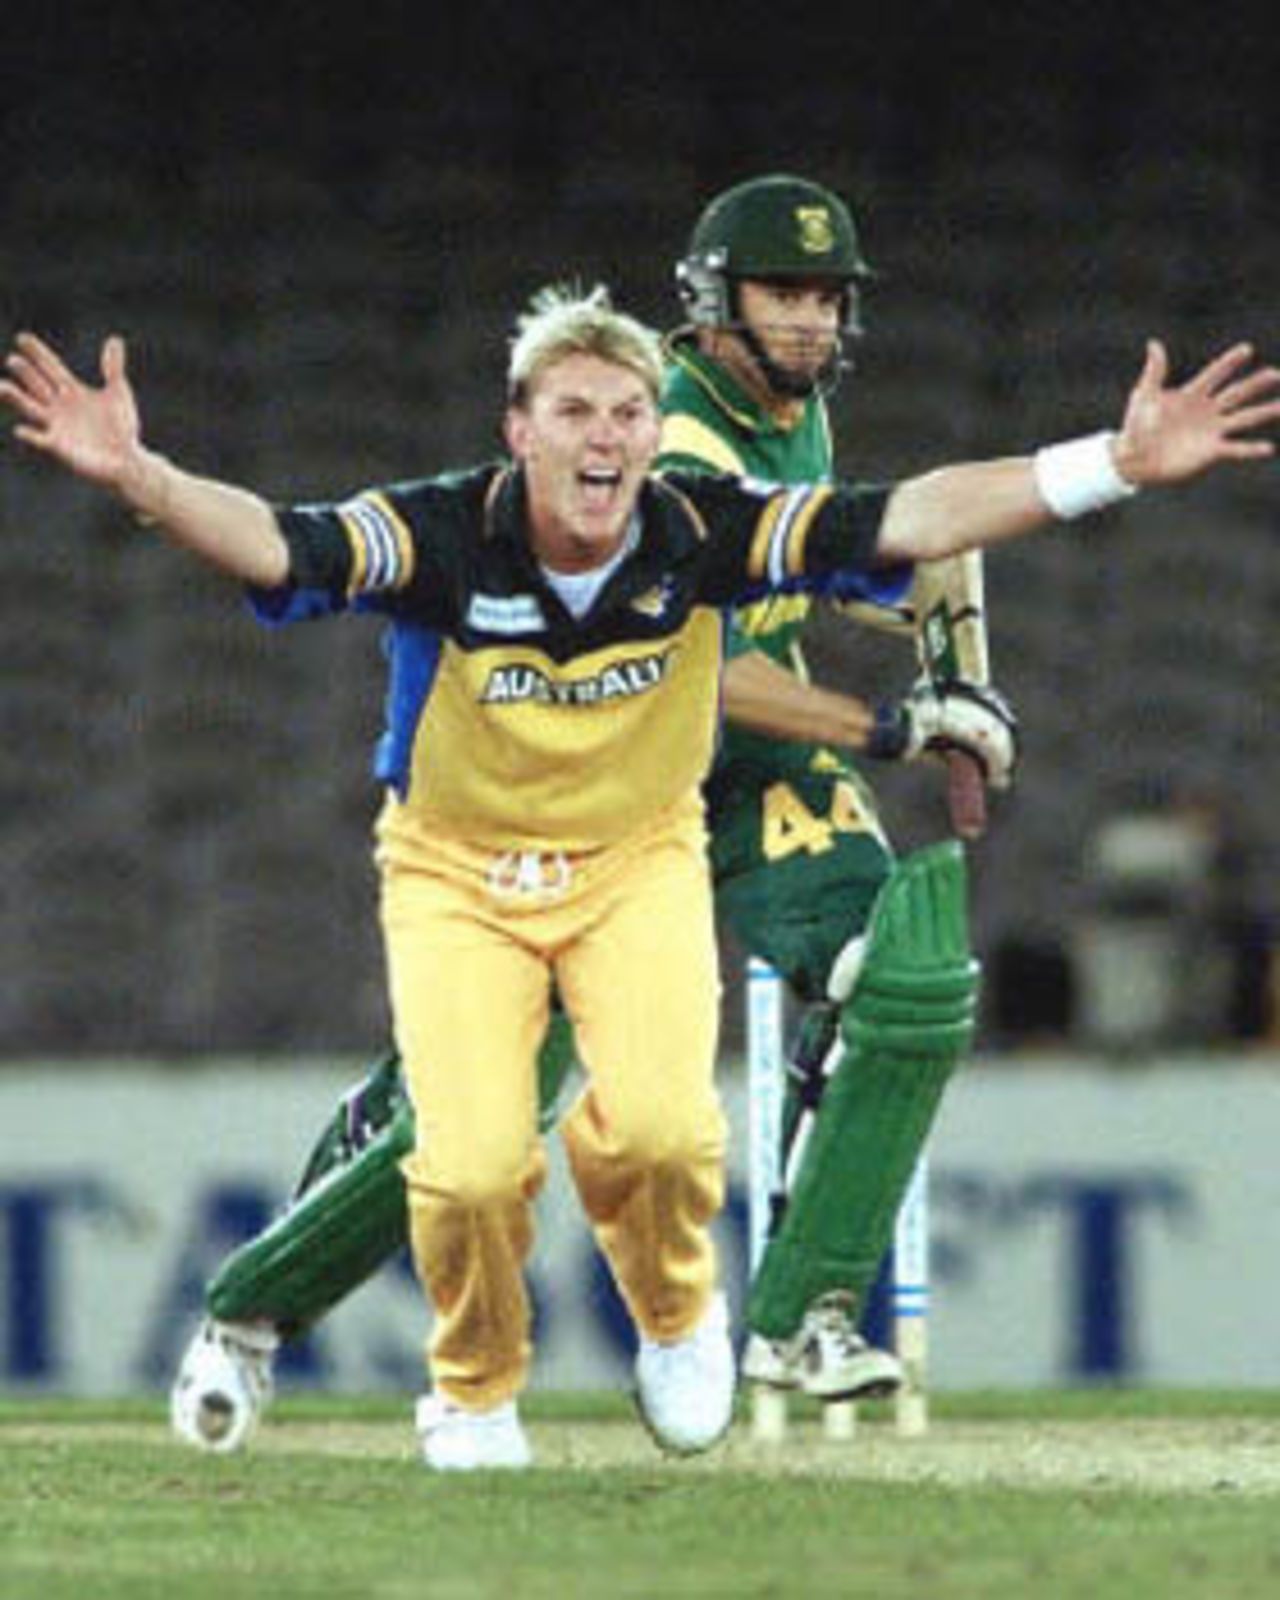 Australian paceman Brett Lee (L) appeals for an LBW decision against South Africa's Neil McKenzie (R) in the first one day cricket match in history to be played under a closed roof at Colonial Stadium in Melbourne as Australia takes on South Africa. Being played in the middle of winter in Melbourne, Australia scored 295-5 in their 50 overs and restricted South Africa to 201-7 in their 50 overs to win the match comfortably. South Africa in Australia, 2000/01, 1st One-Day International, Australia v South Africa, Colonial Stadium, Melbourne, 16 August 2000.